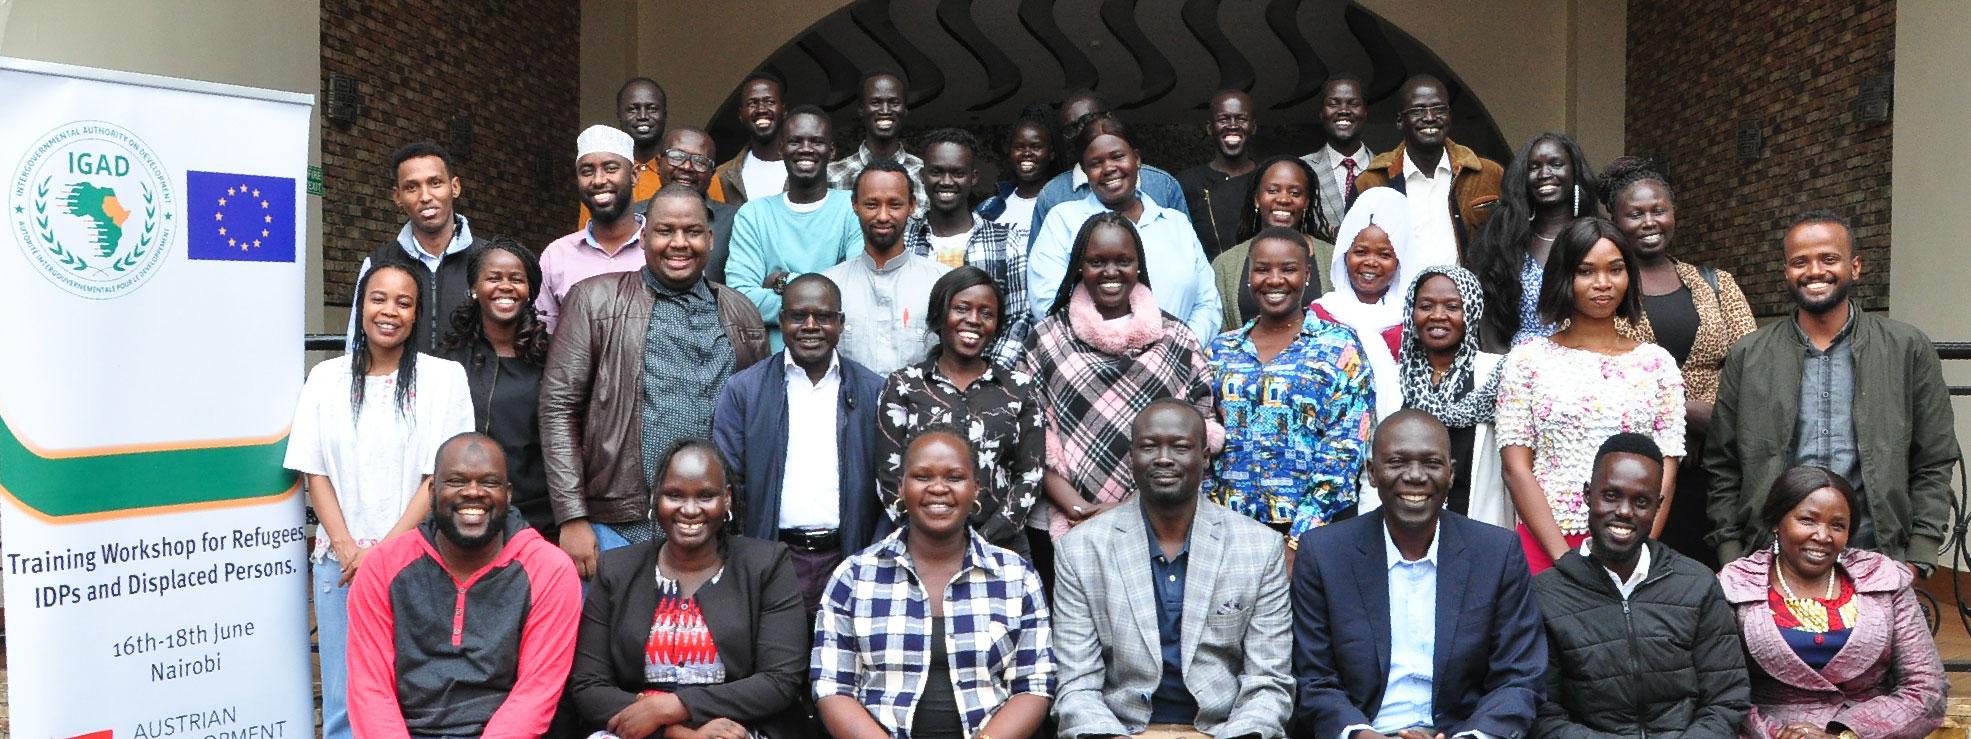 Training on Dialogue and Mediation for IDPs and Refugees.